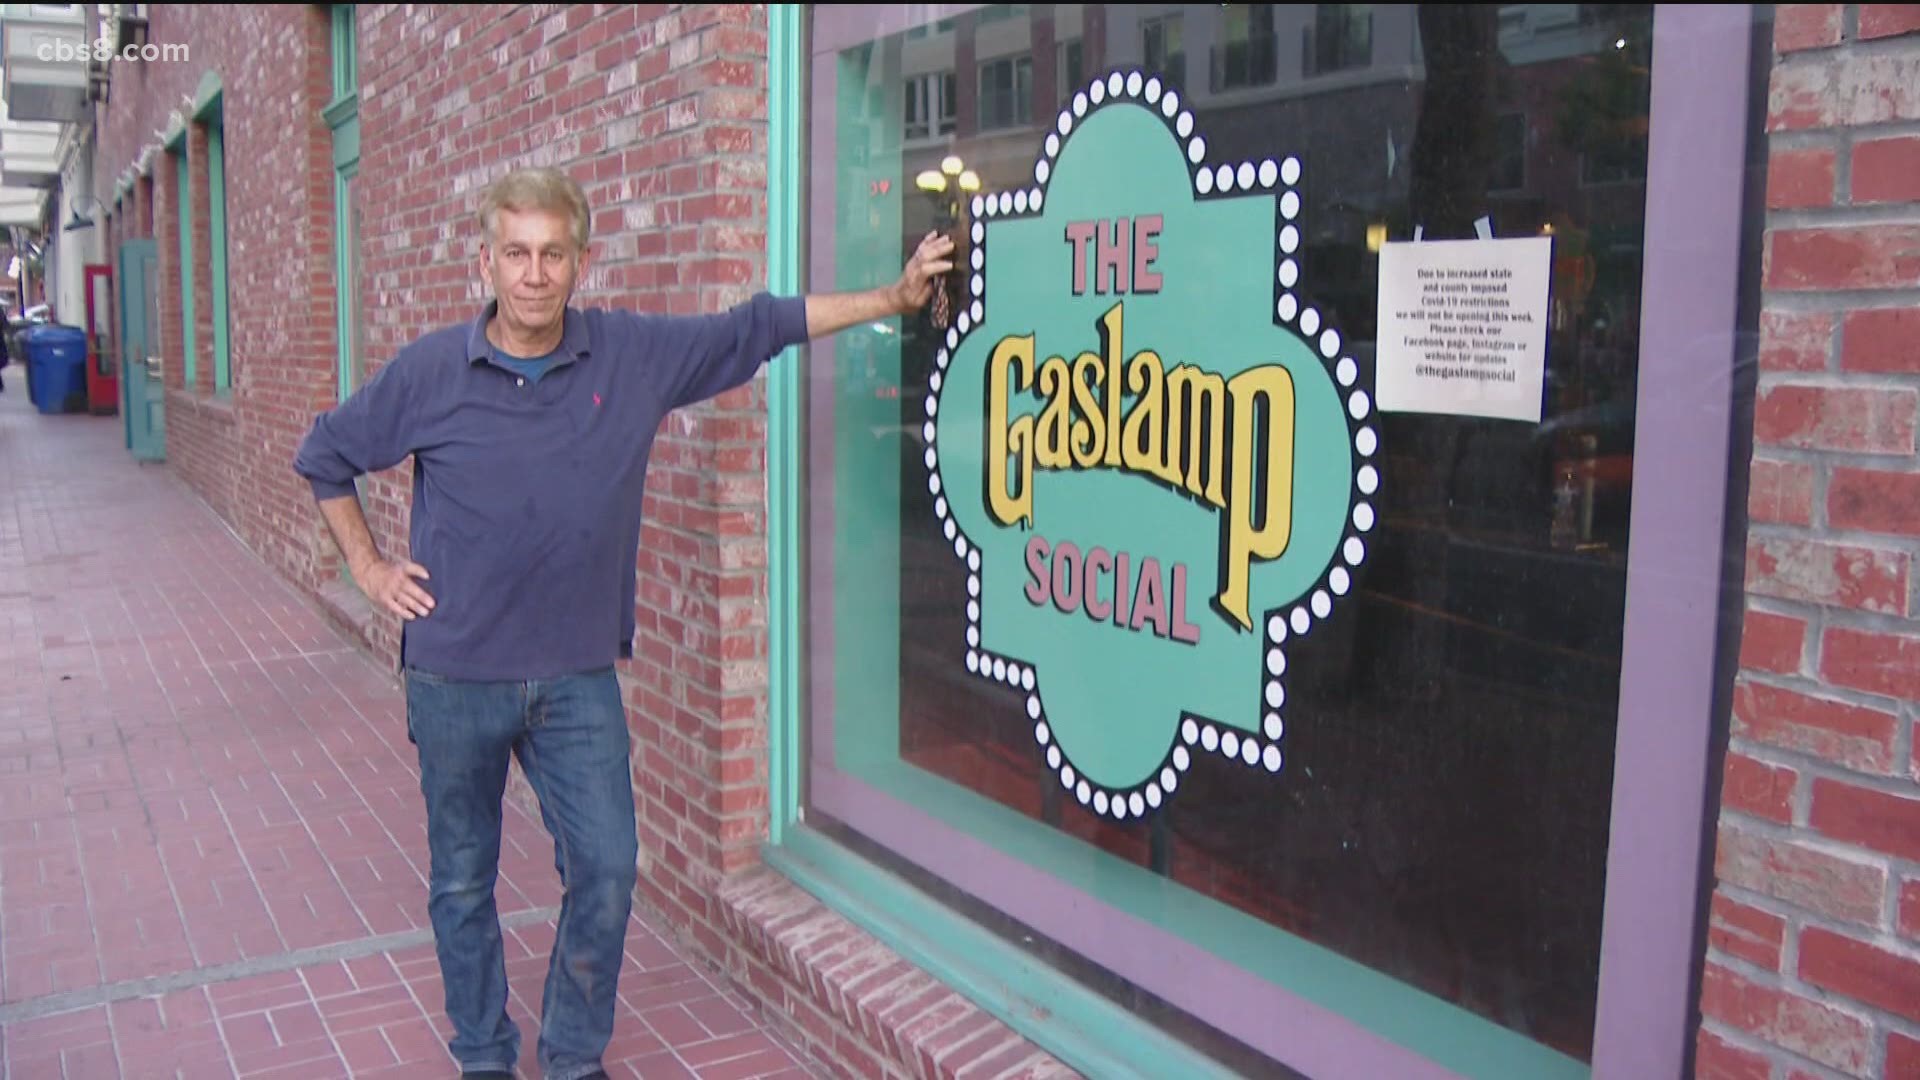 The owner of Gaslamp Social said Mayor and City of San Diego were unhelpful in preventing closure.